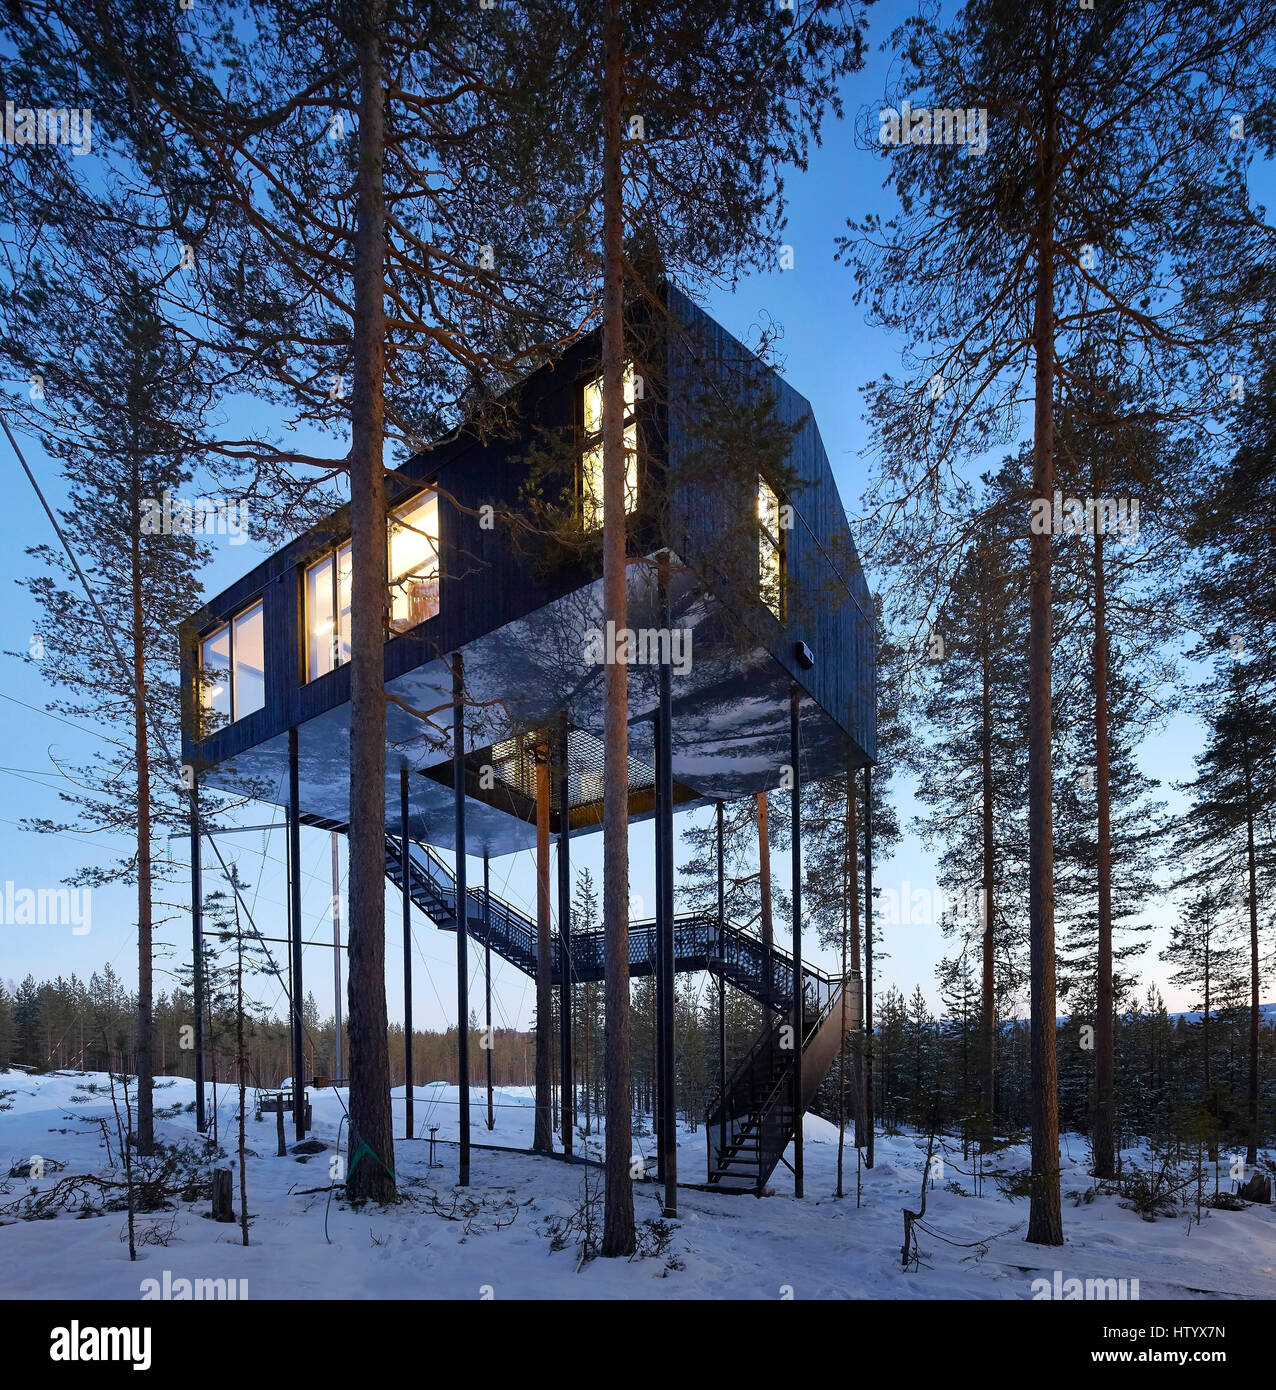 The 7th Room design by Snøhetta. Treehotel, Harads, Sweden. Architect: various, 2016. Stock Photo